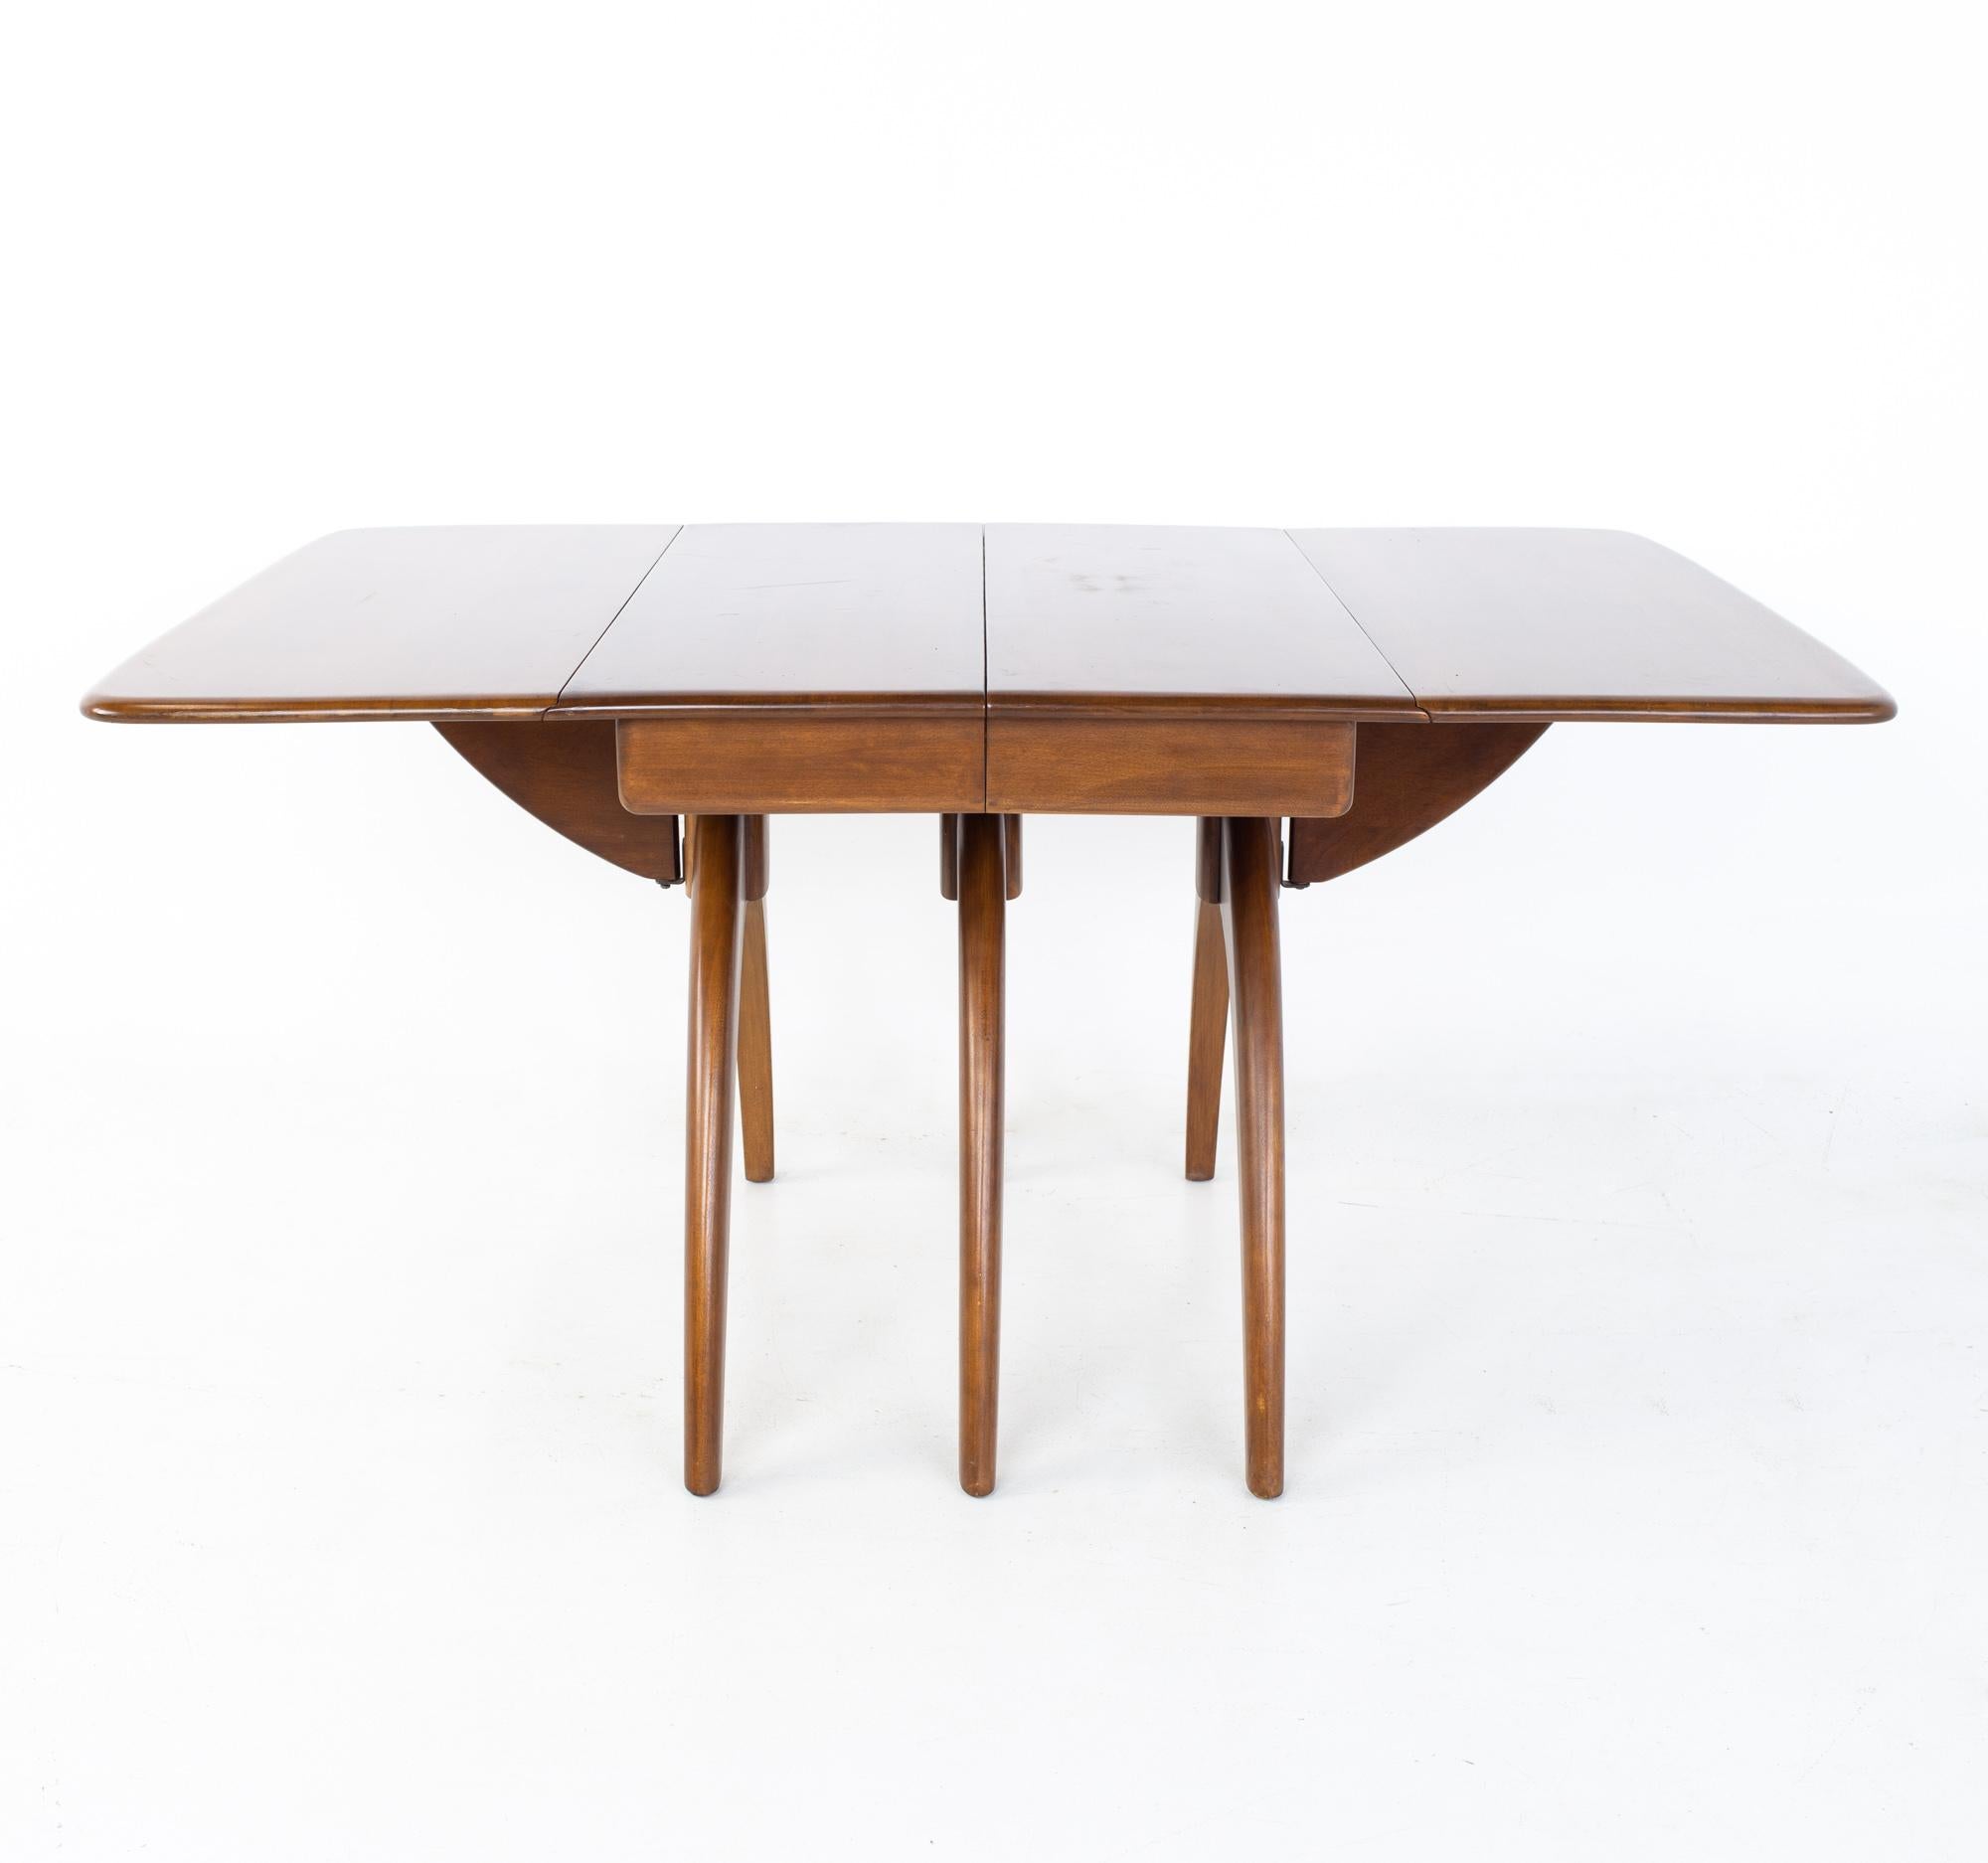 Heywood Wakefield mid-century wishbone dining table.

Table measures: 58 wide x 40 deep x 29 inches high; each leaf is 18.25 inches wide, making a maximum table width of 94.5 inches when both leaves are used.

All pieces of furniture can be had